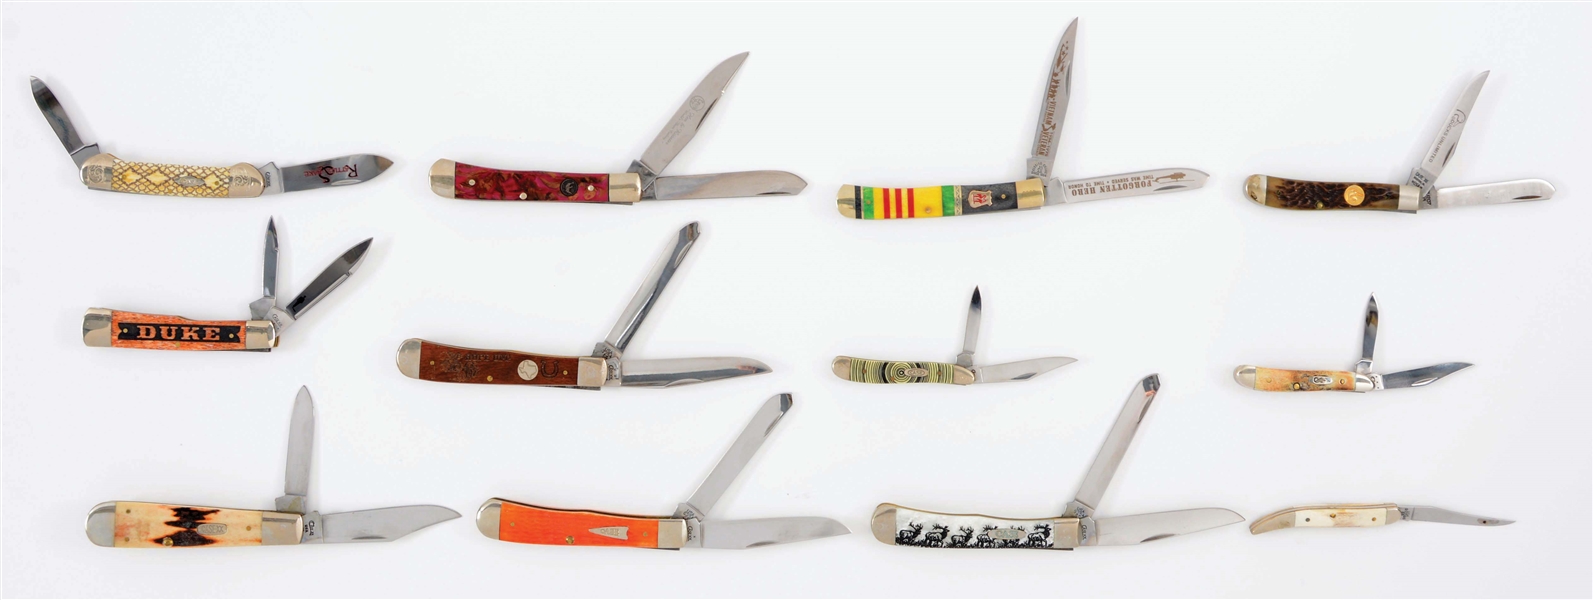 LOT OF 12: CASE KISSING CRANE - HEN AND ROOSTER FOLDING KNIVES.